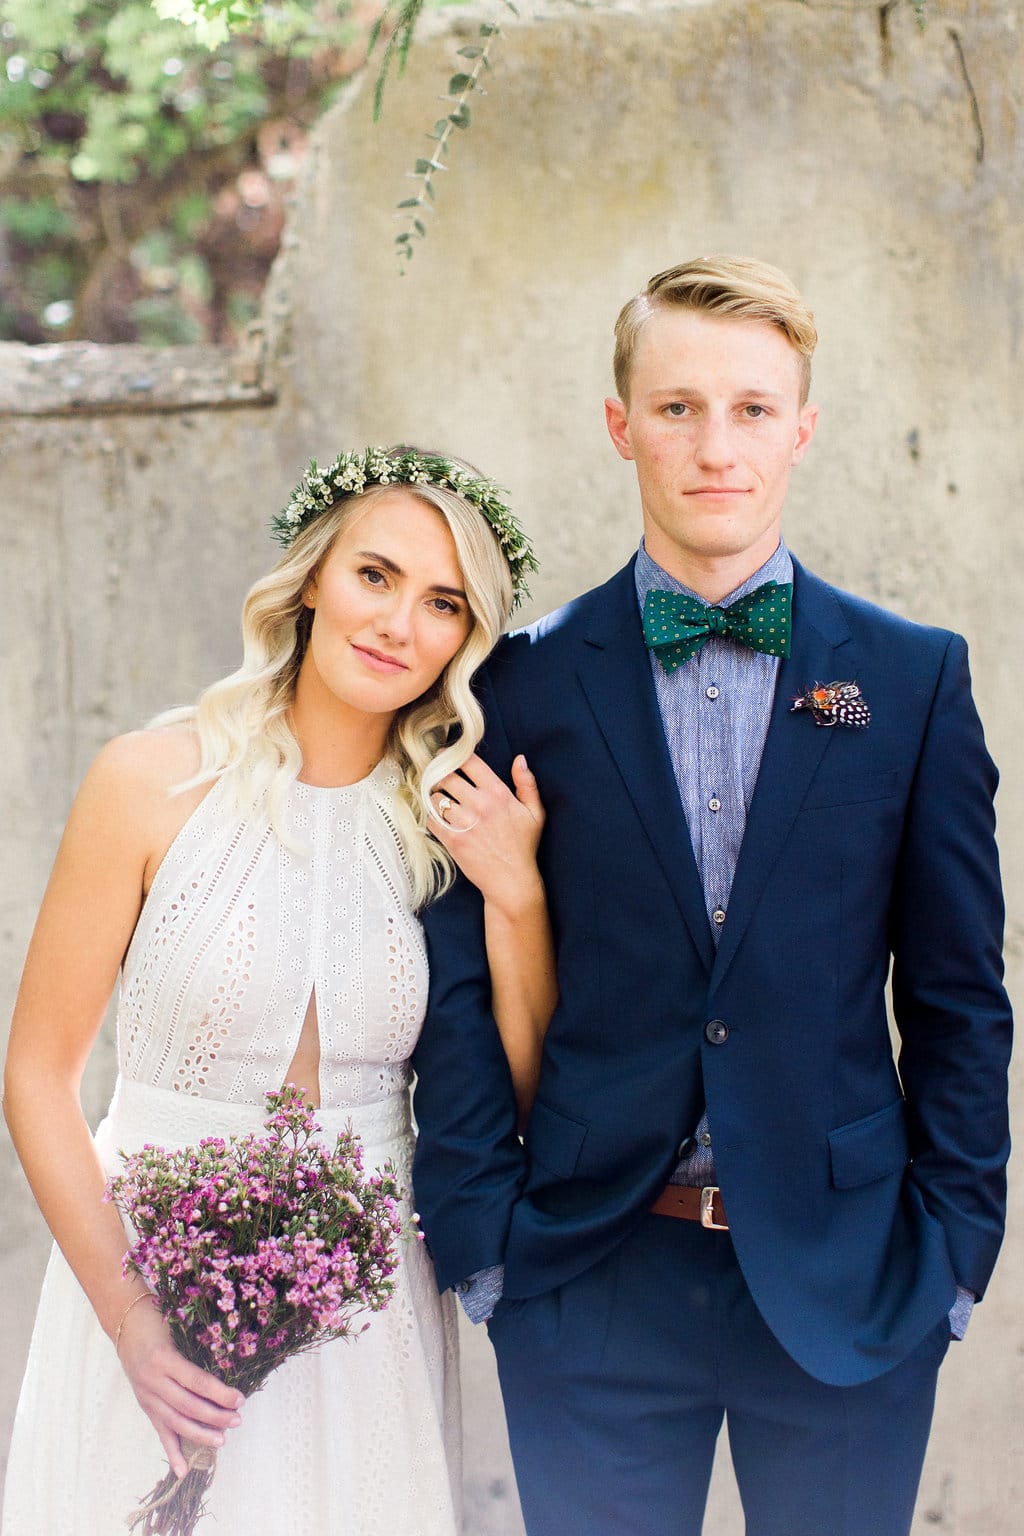 Eyelet Lace Wedding Gown in Utah Canyon Wedding - Midgley bride is wearing Nicole by Sottero and Midgley